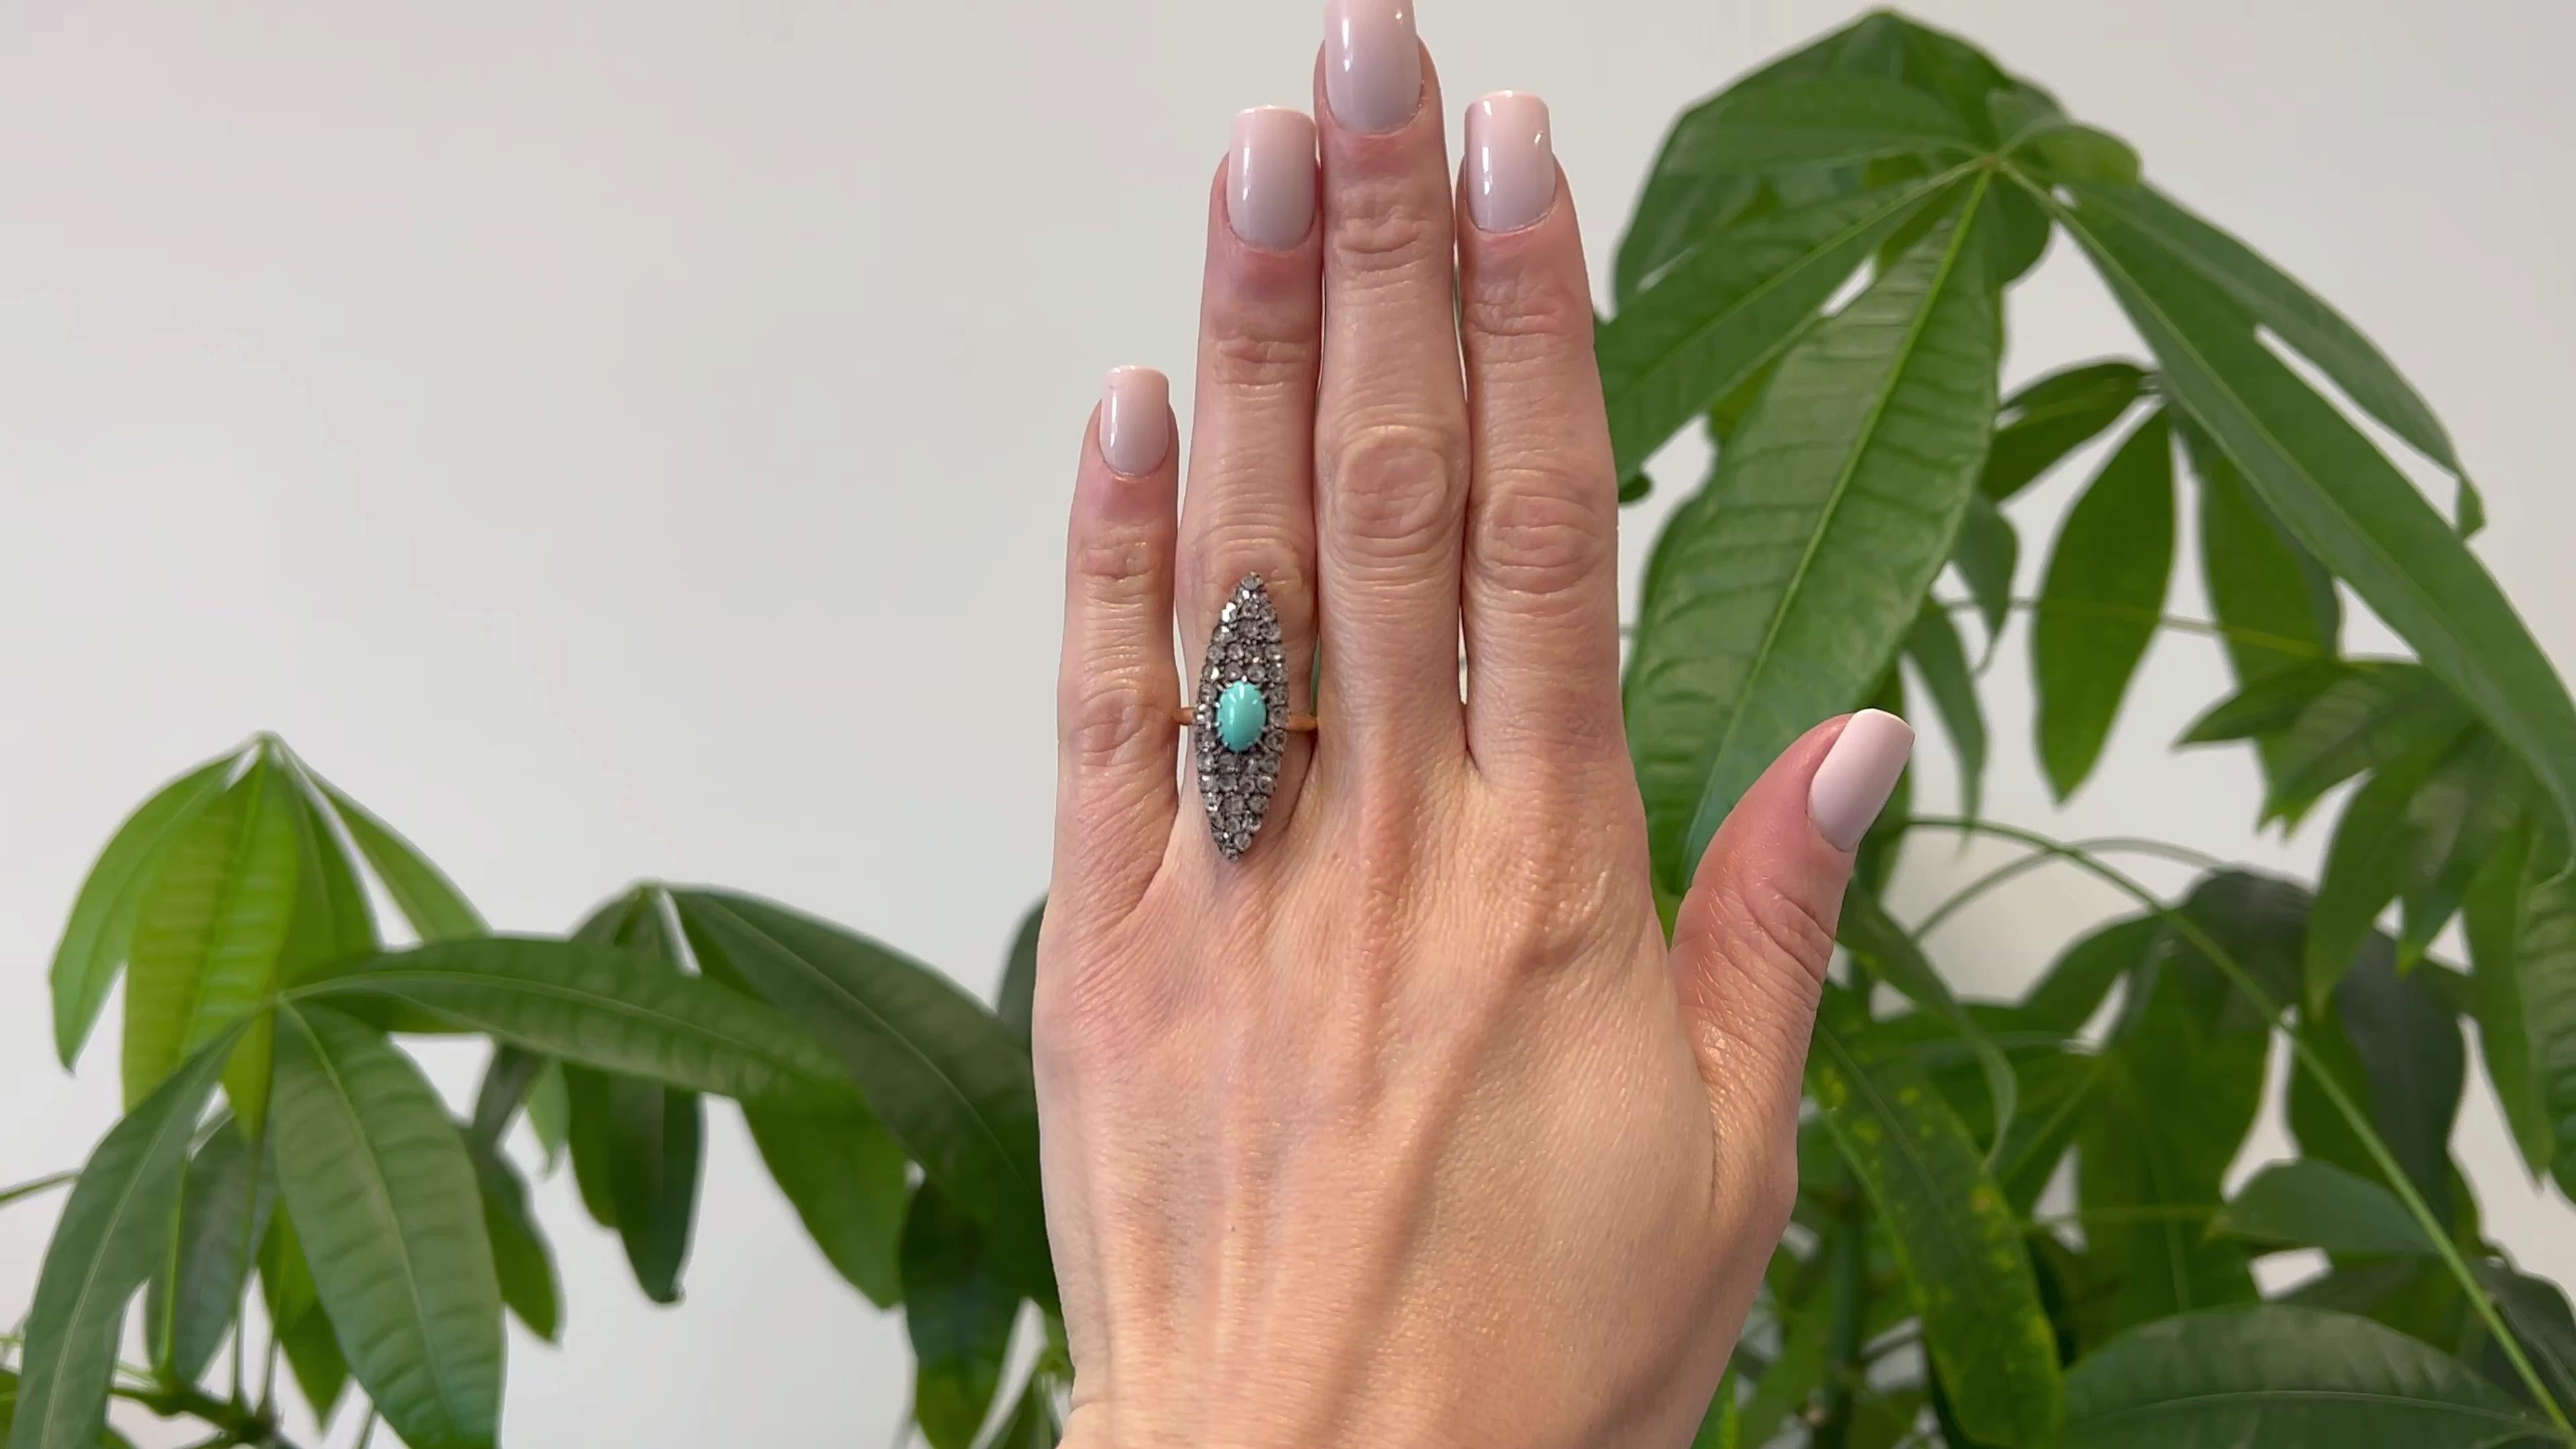 One Antique French Turquoise Diamond 18k Rose Gold Silver Navette Ring. Featuring one cabochon turquoise weighing approximately 1.10 carats. Accented by 40 senaille cut diamonds with a total weight of approximately 1.10 carats, graded I-J color,